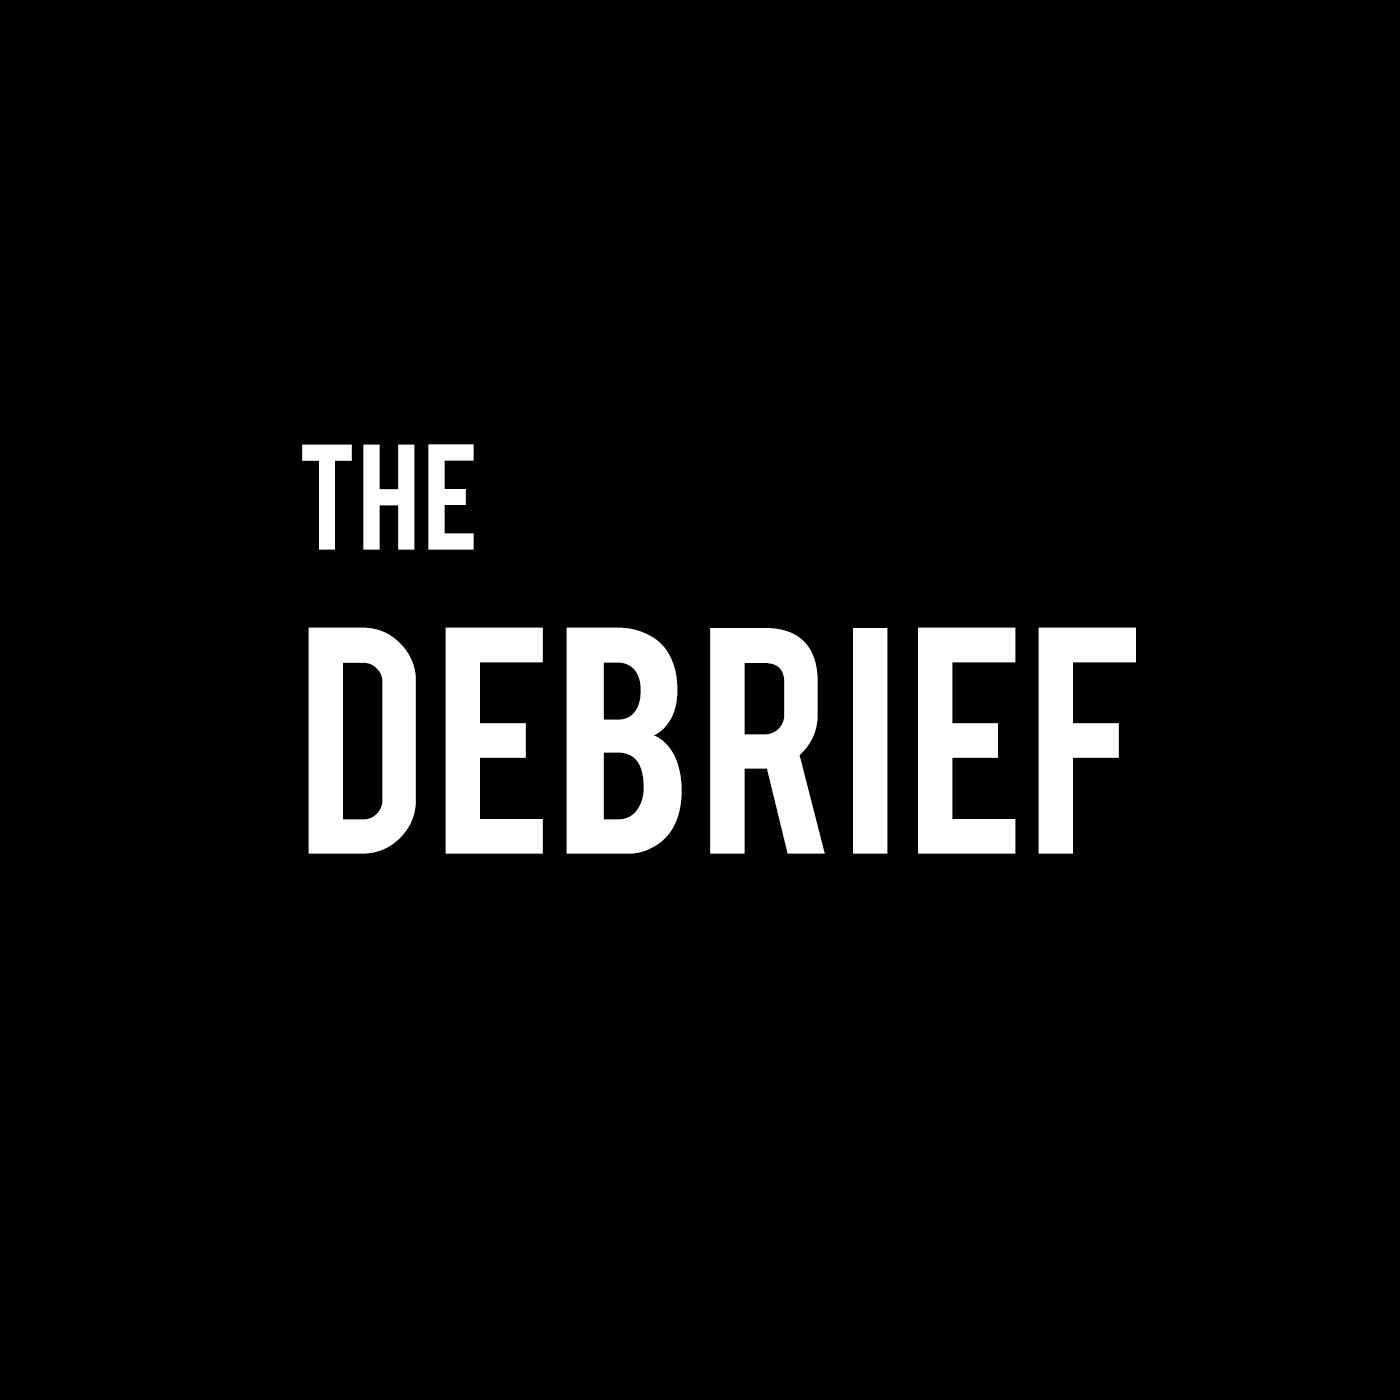 The Debrief w/ Jocko and Dave Berke: Your Boss Thinks You Don’t Show Enough Passion In Your Leadership